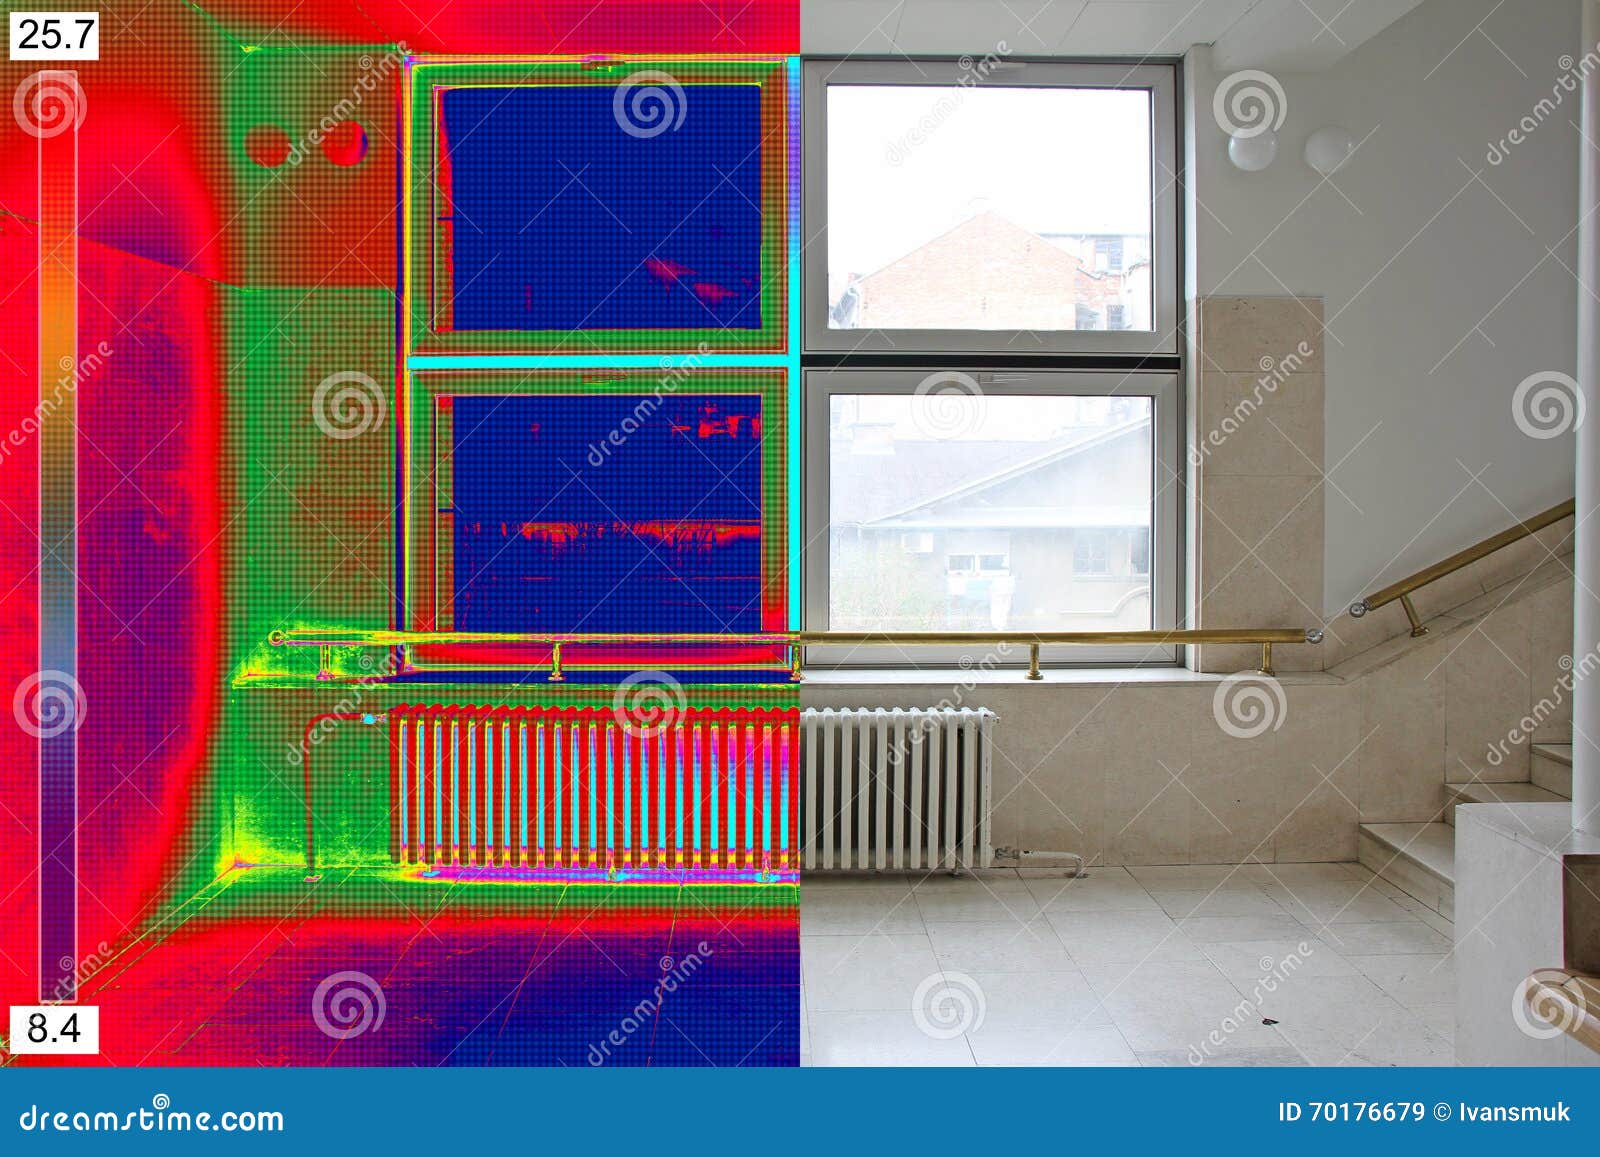 thermal and real image of radiator heater and a window on a buil